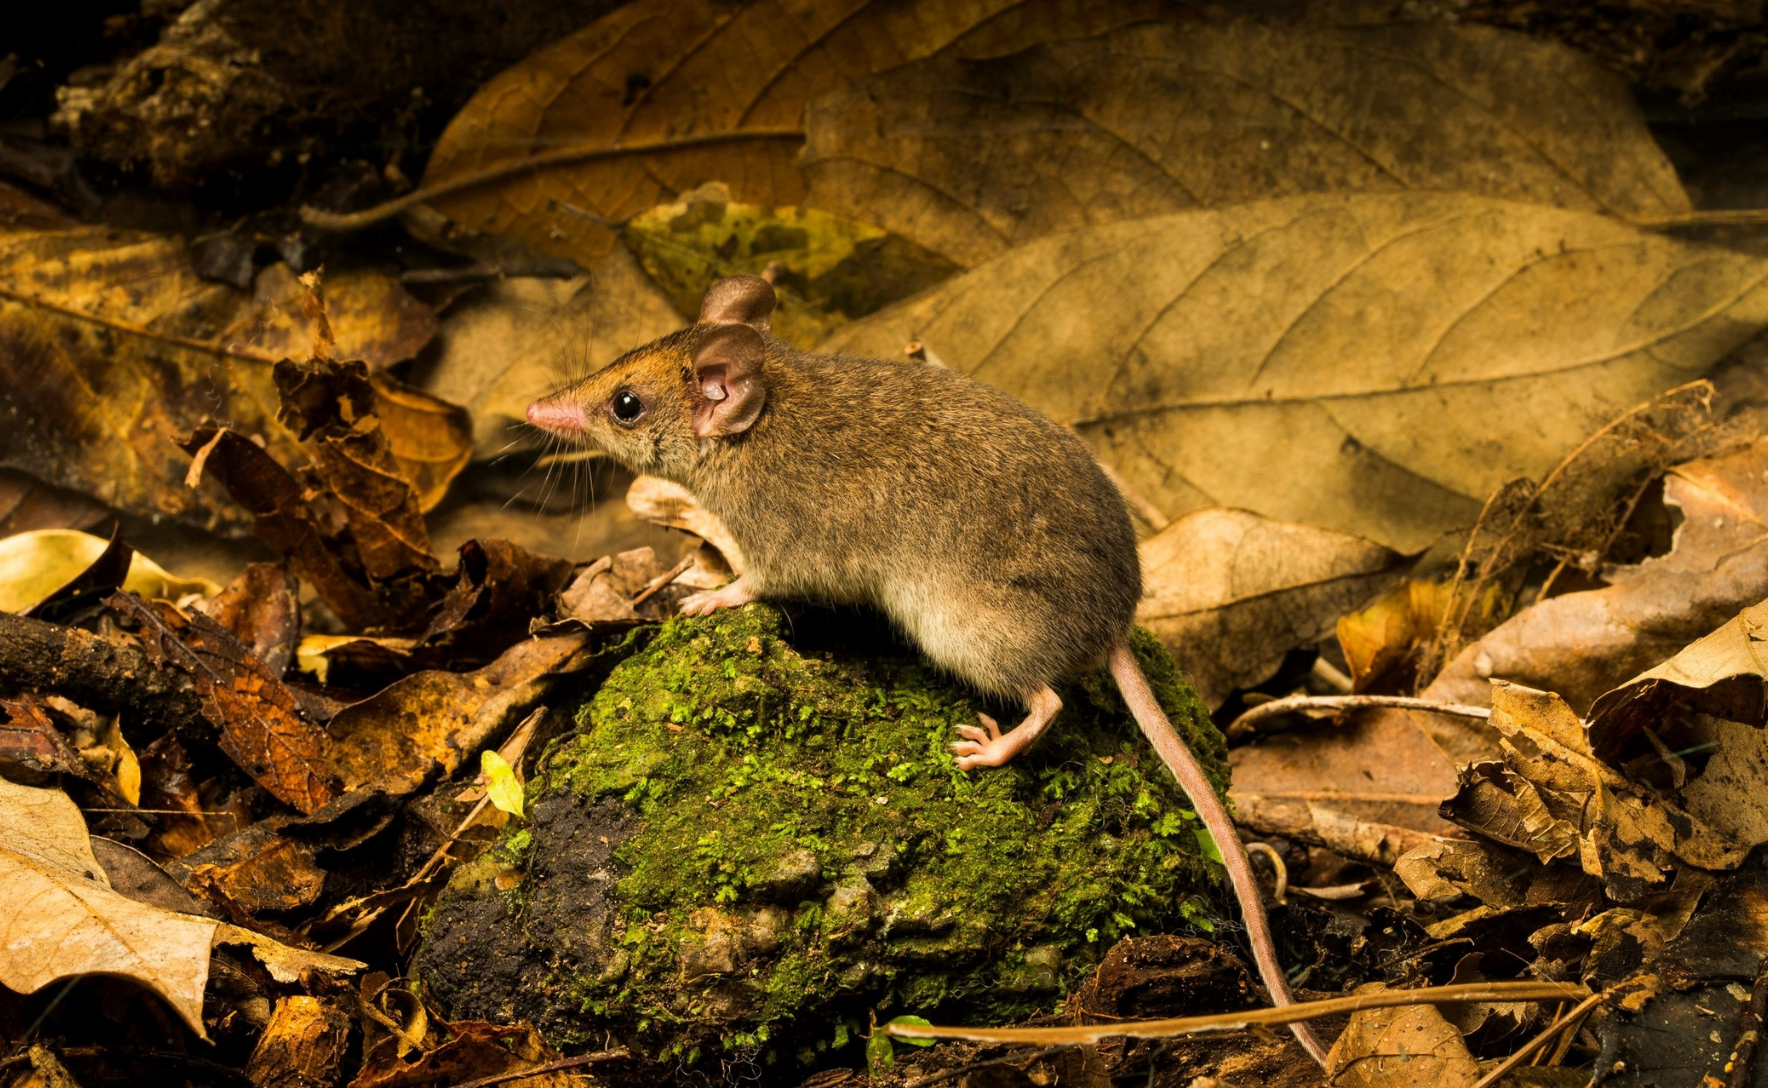 A small white-footed dunnart perched on a mossy rock surrounded by leaf litter. The dunnart is a small marsupial with brown fur.